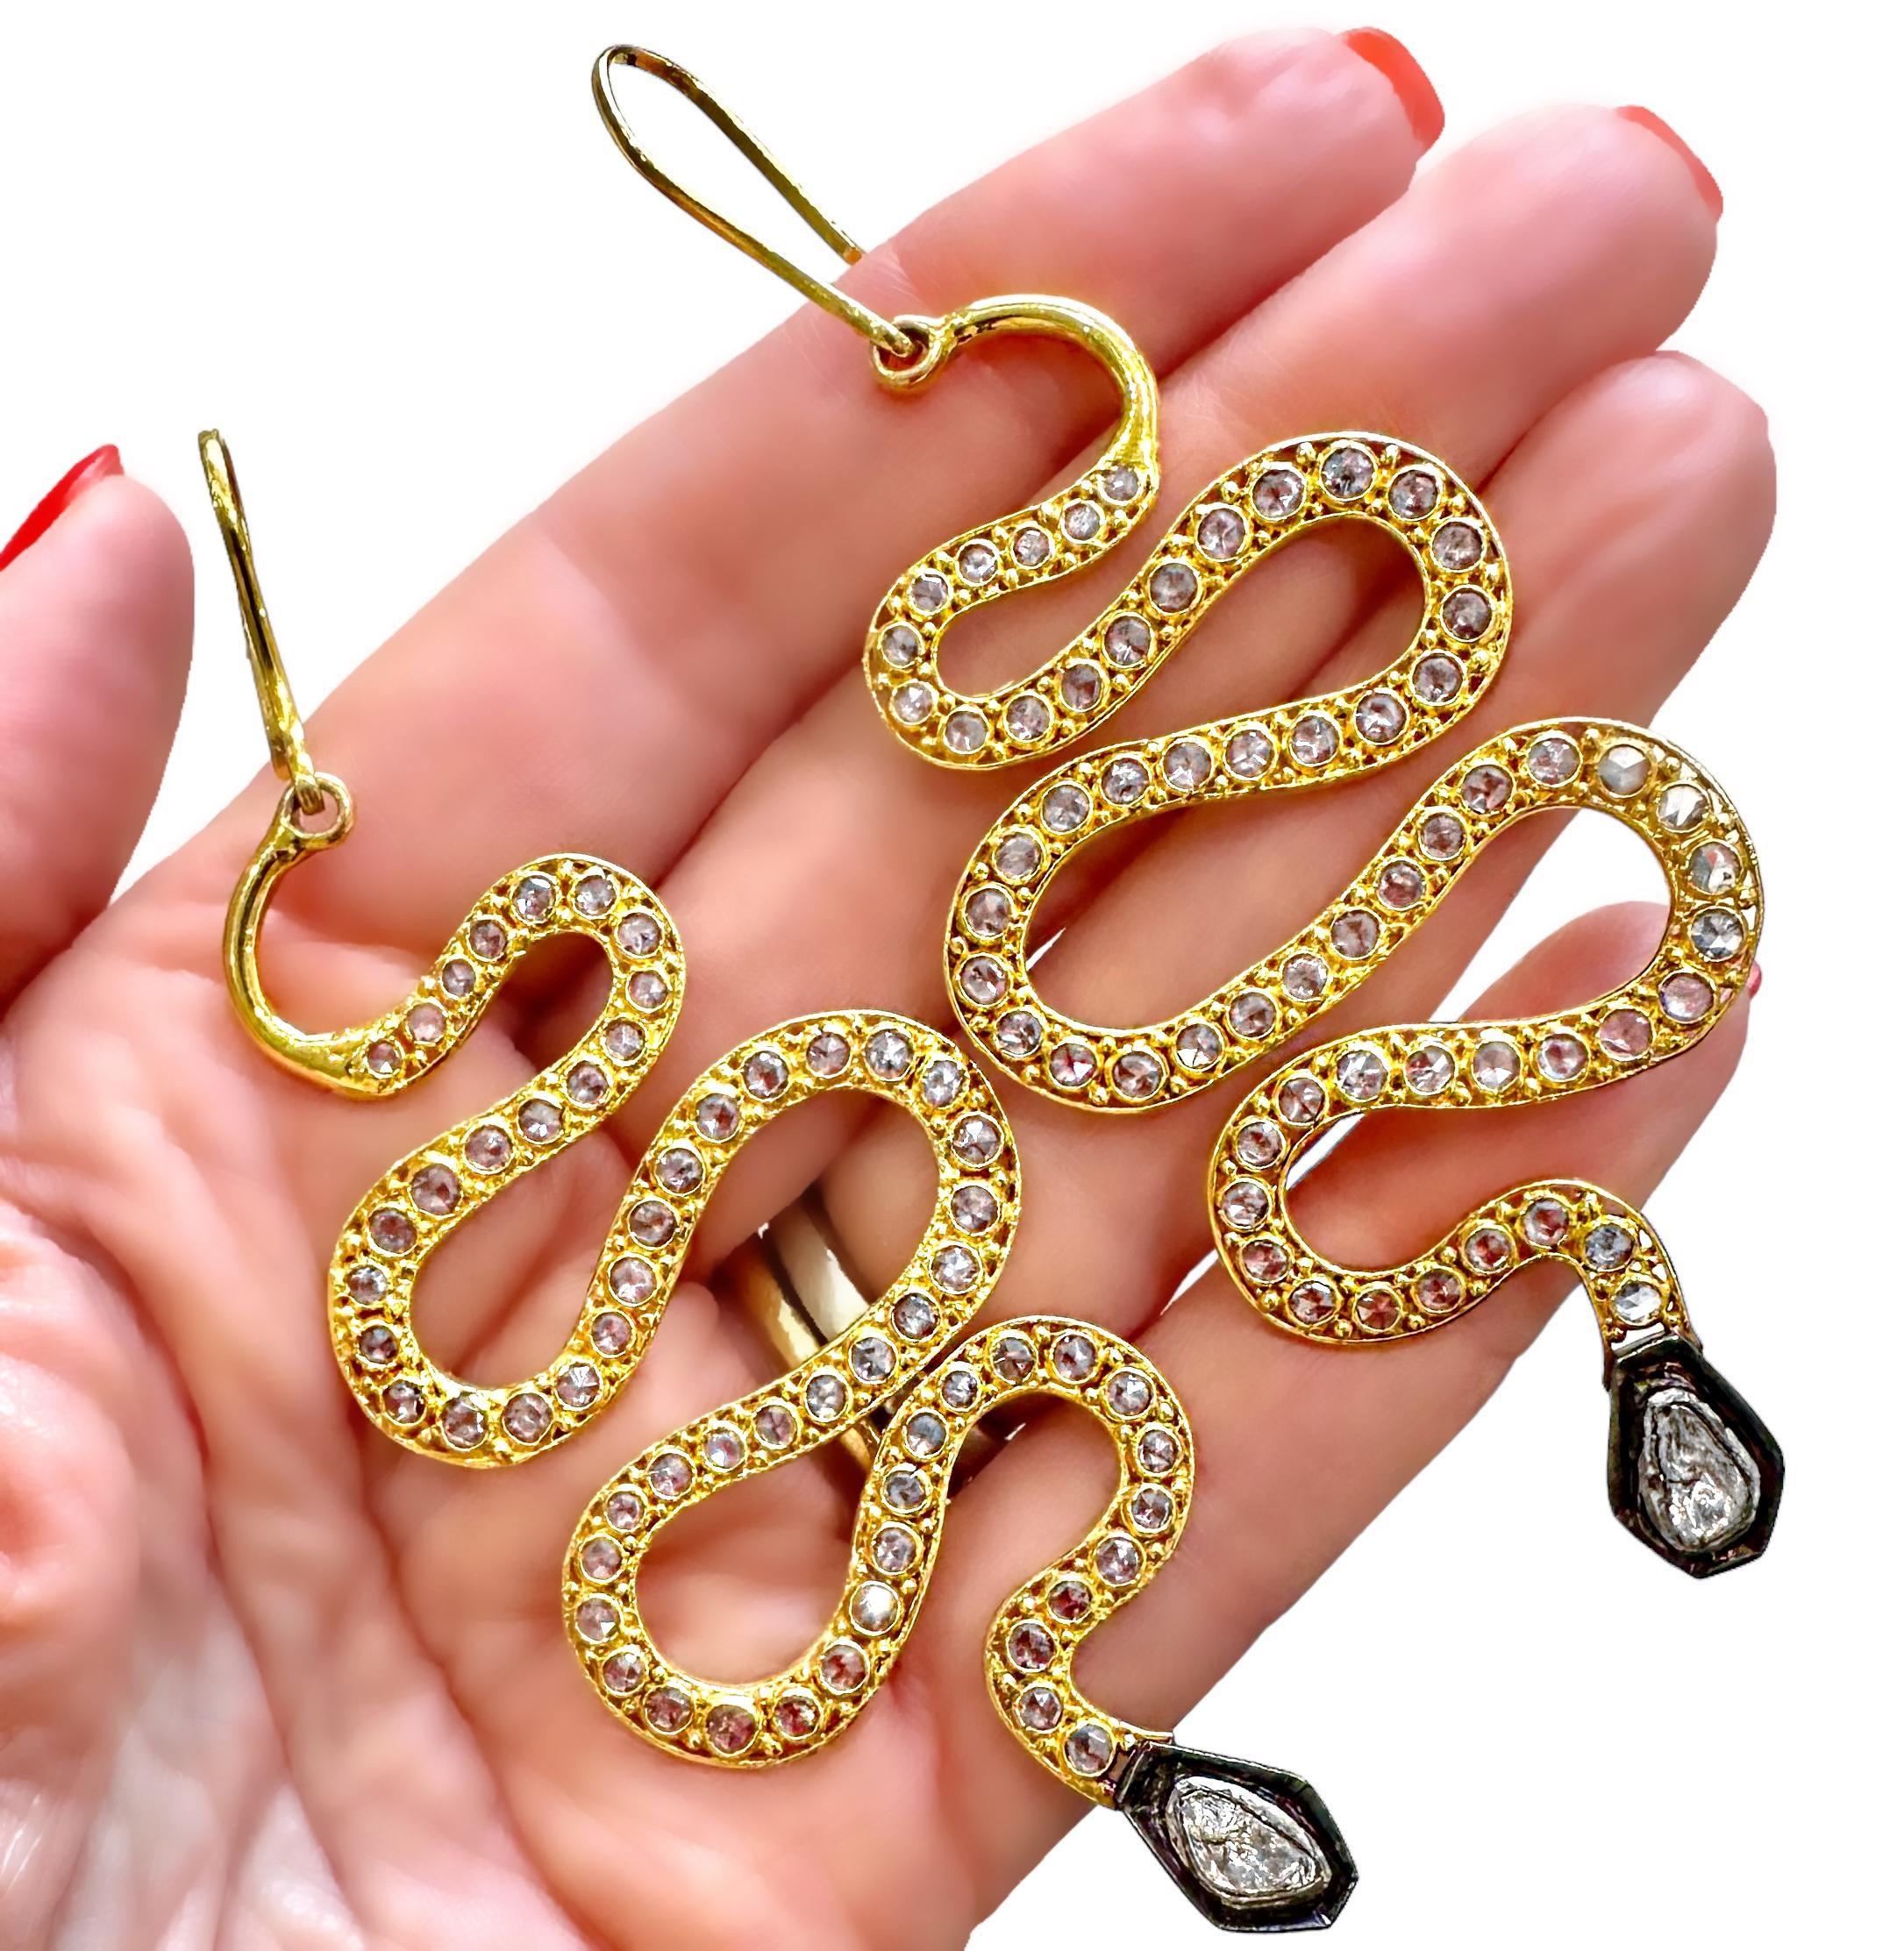 3.5 Inches Long 14k Yellow Gold and Rose Cut Diamond Serpentine Hanging Earrings In Excellent Condition For Sale In Palm Beach, FL